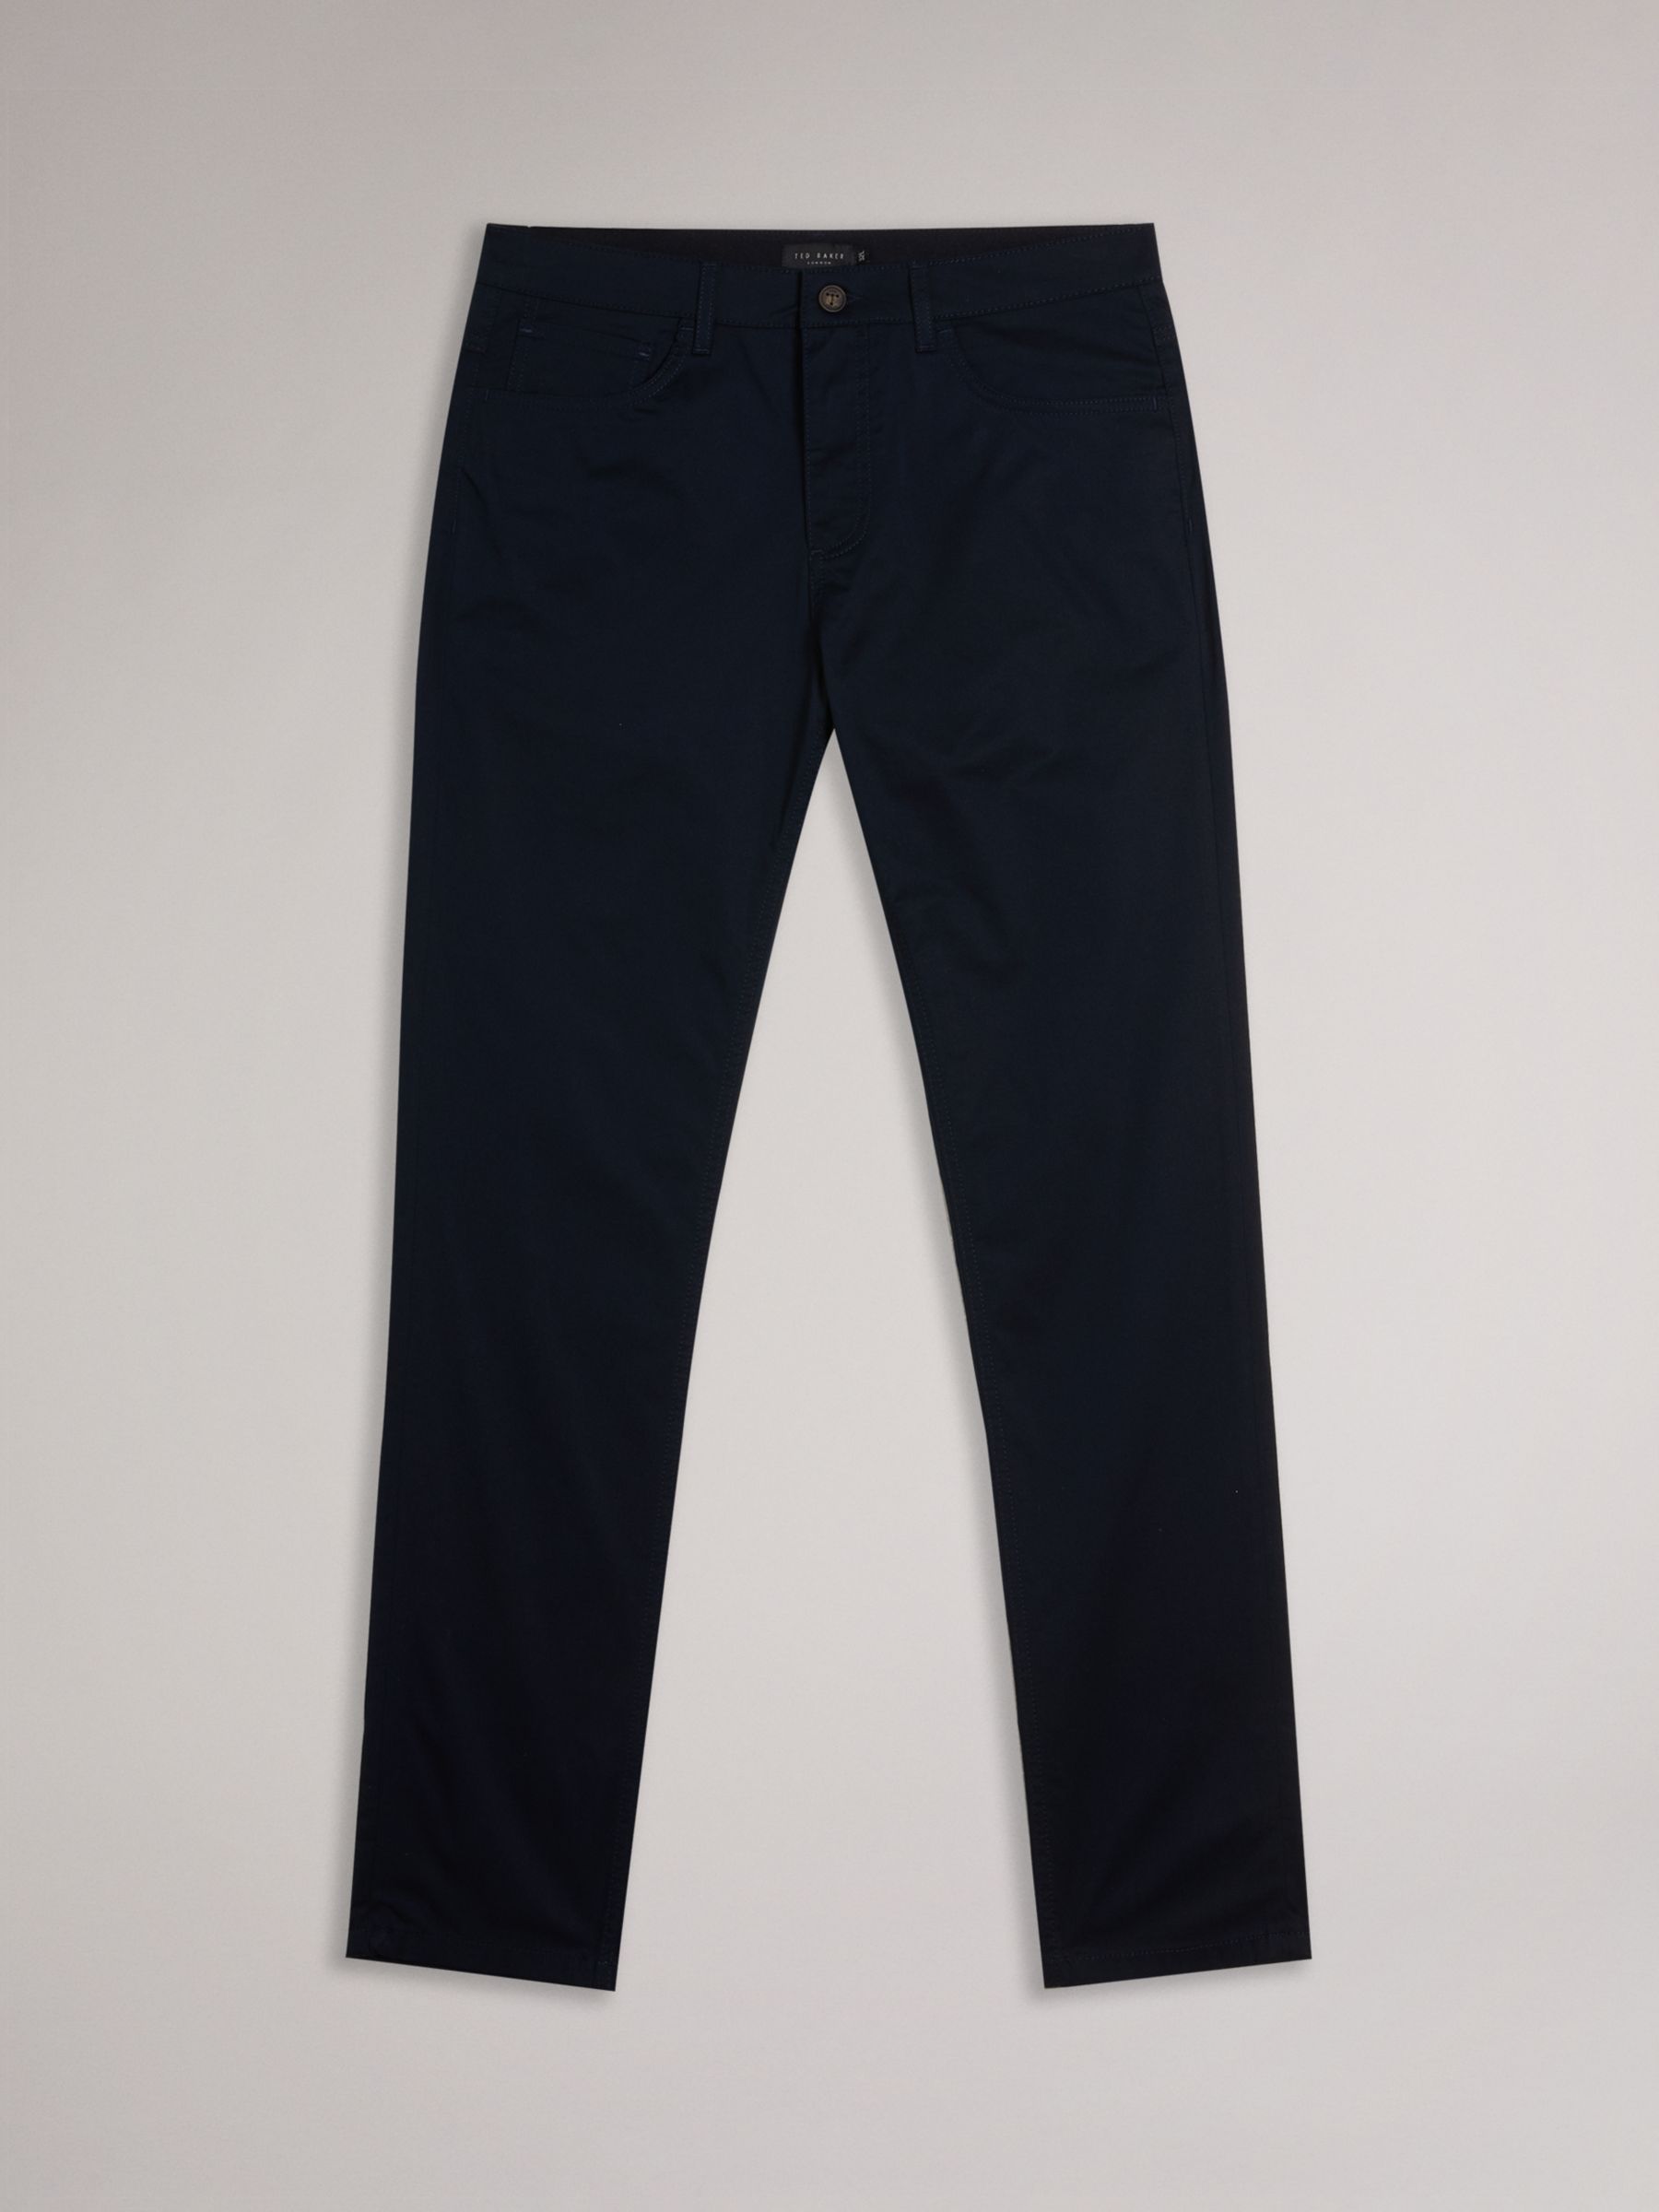 Ted Baker Daniels Irvine Slim Fit Chino Trousers, Navy at John Lewis ...